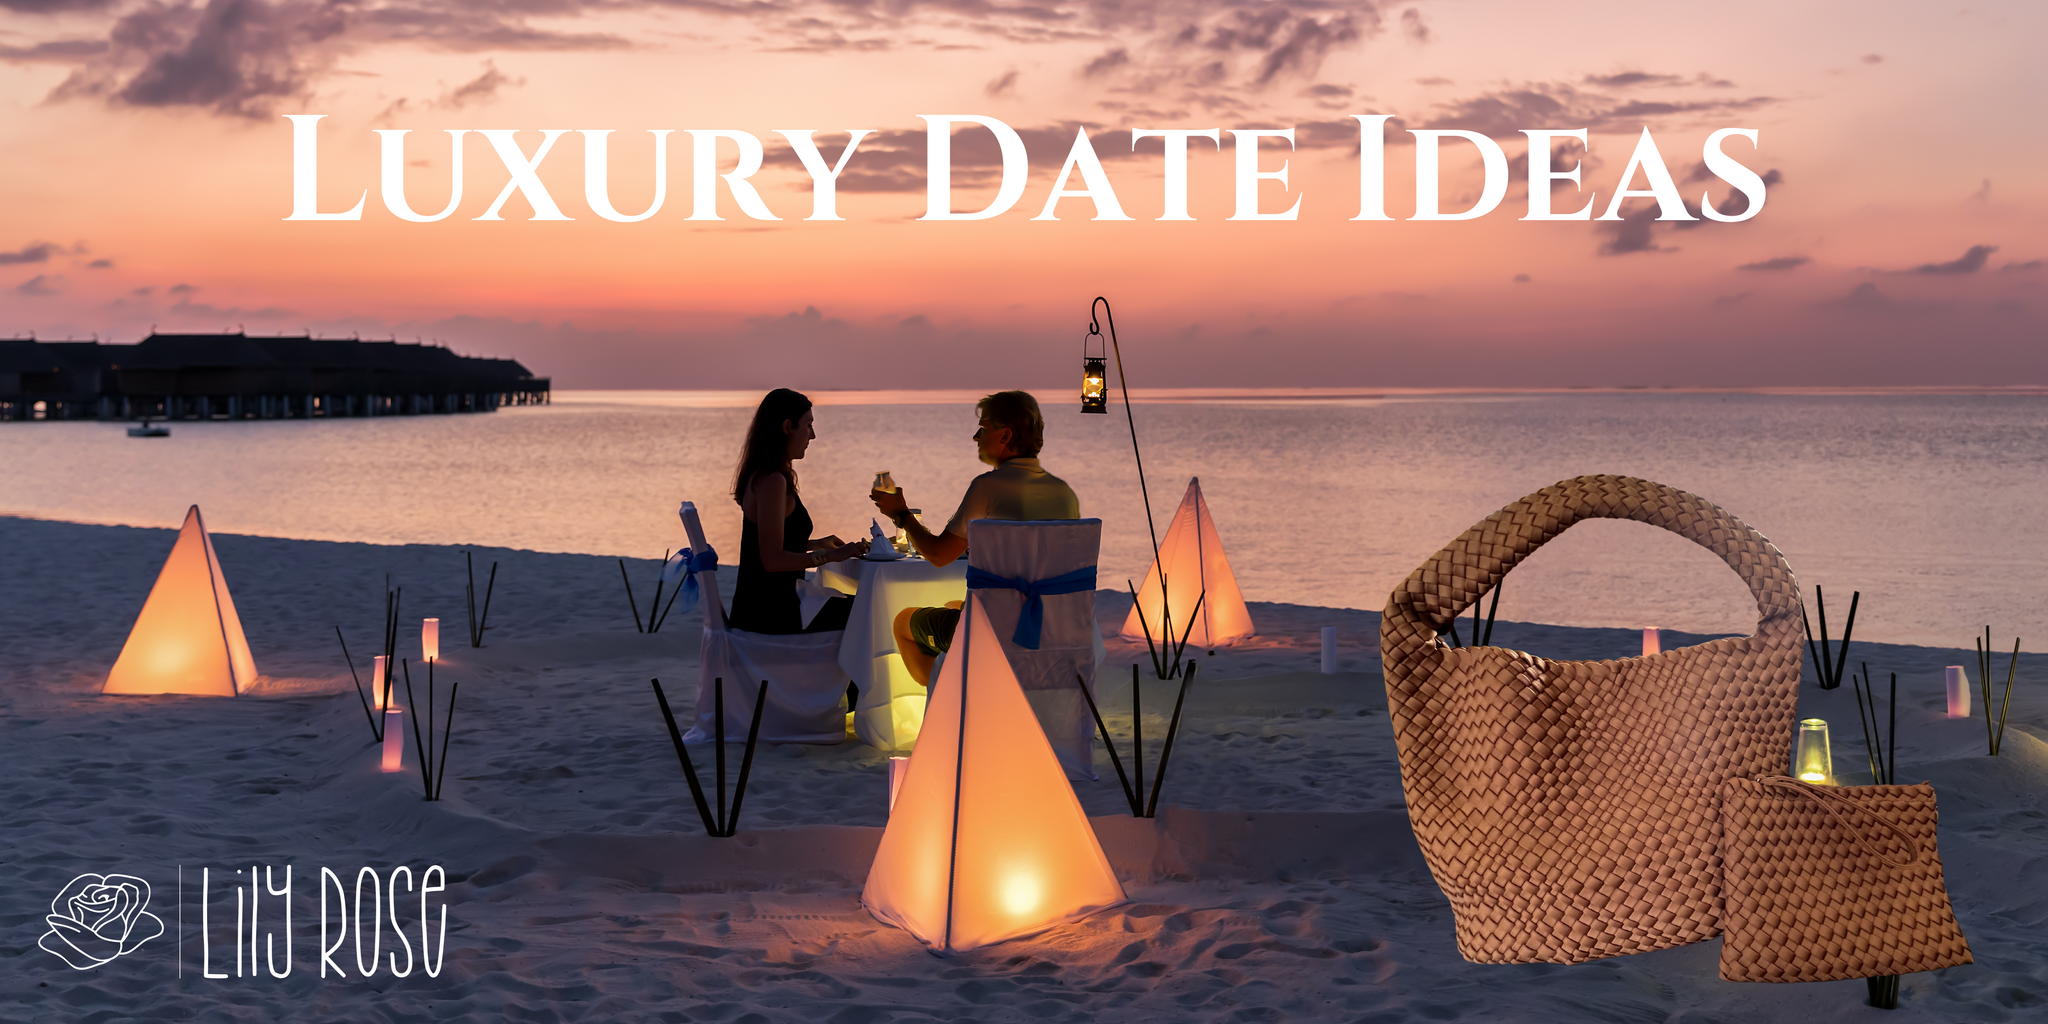 Lily Rose Collection Desert Stylin' Bag and Purse Set. Luxurious Date Ideas.